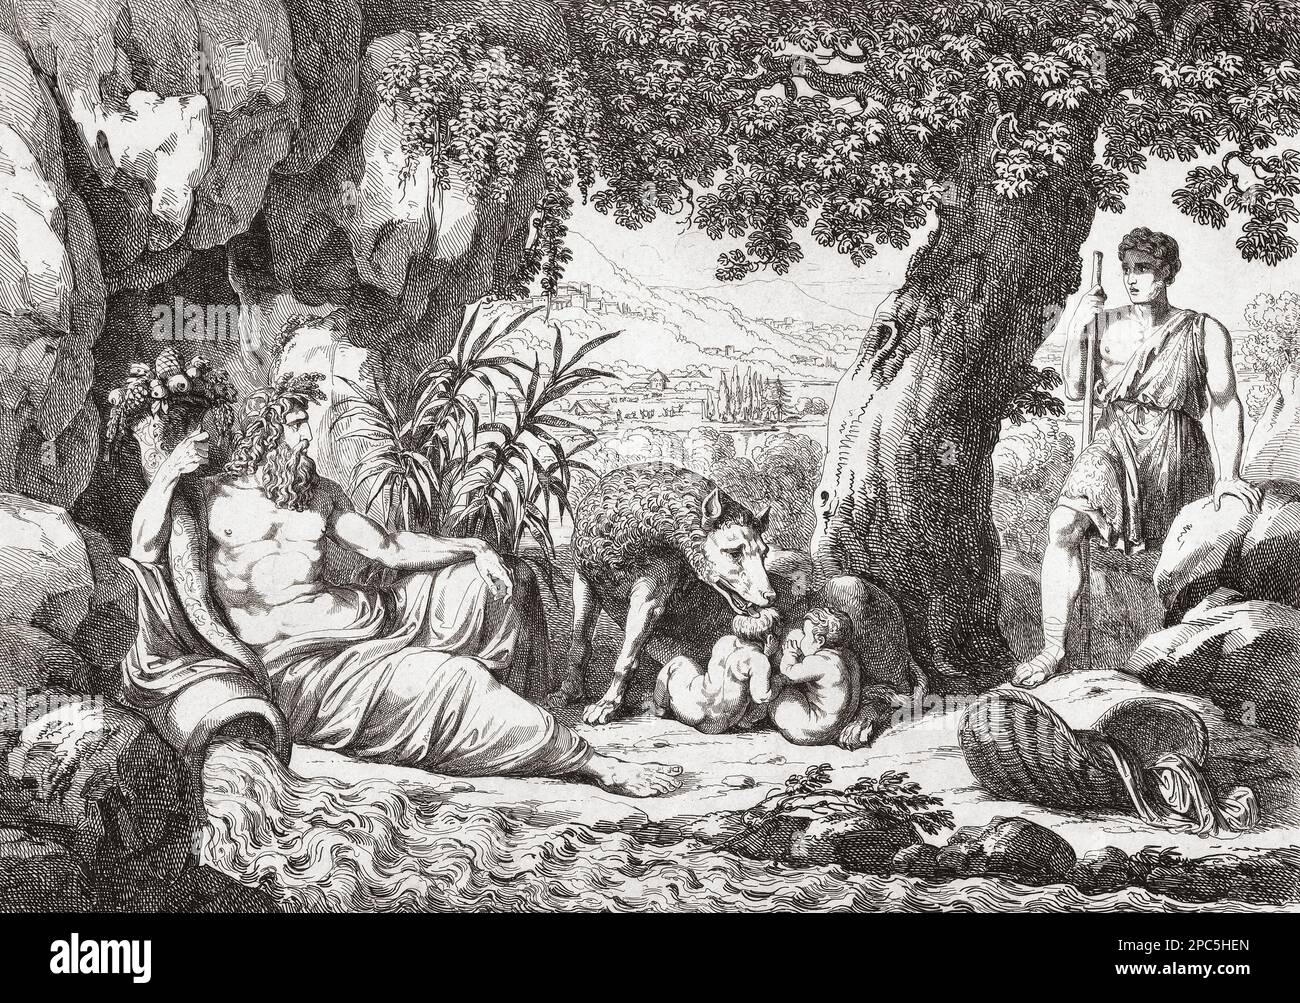 Romulus and Remus are discovered by the shepherd Faustulus being suckled by the she-wolf which had saved the twins lives when they were abandoned.  The god Mars, said to have been their father, watches.  After a 19th century work by Bartolomeo Pinelli. Stock Photo